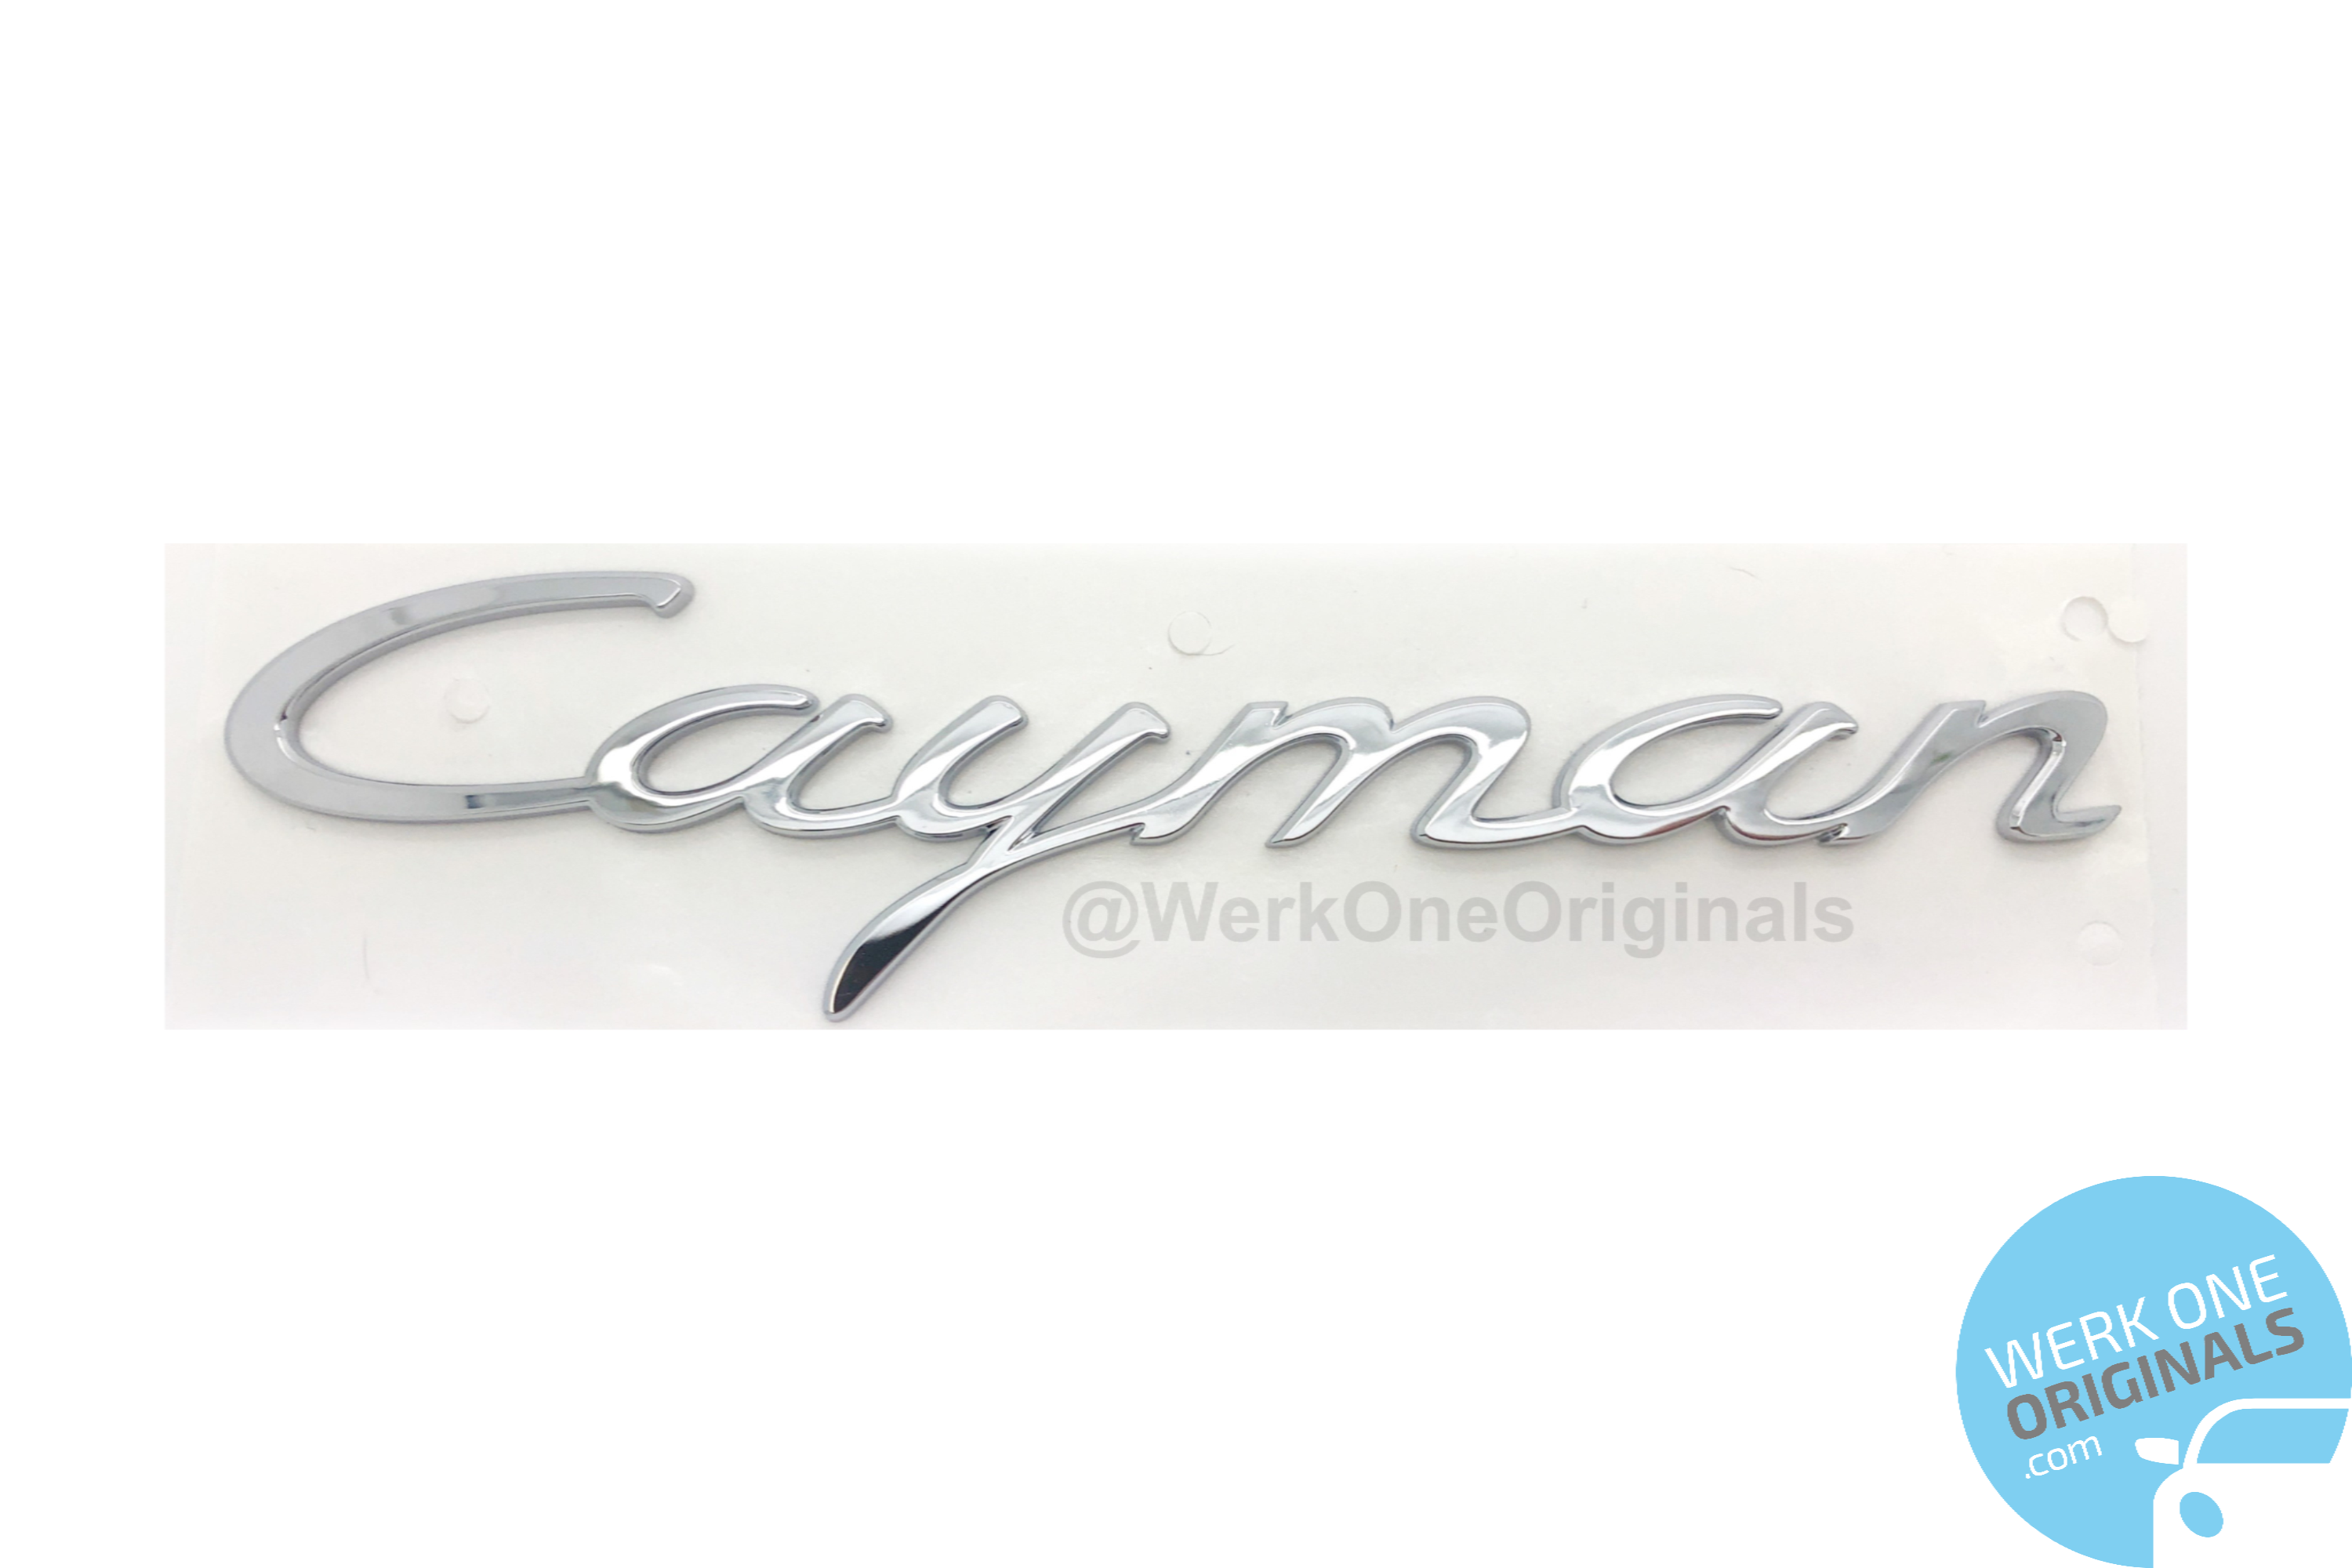 Porsche Official 'Cayman' Rear Badge Decal in Chrome Silver for Cayman Type 981 Models